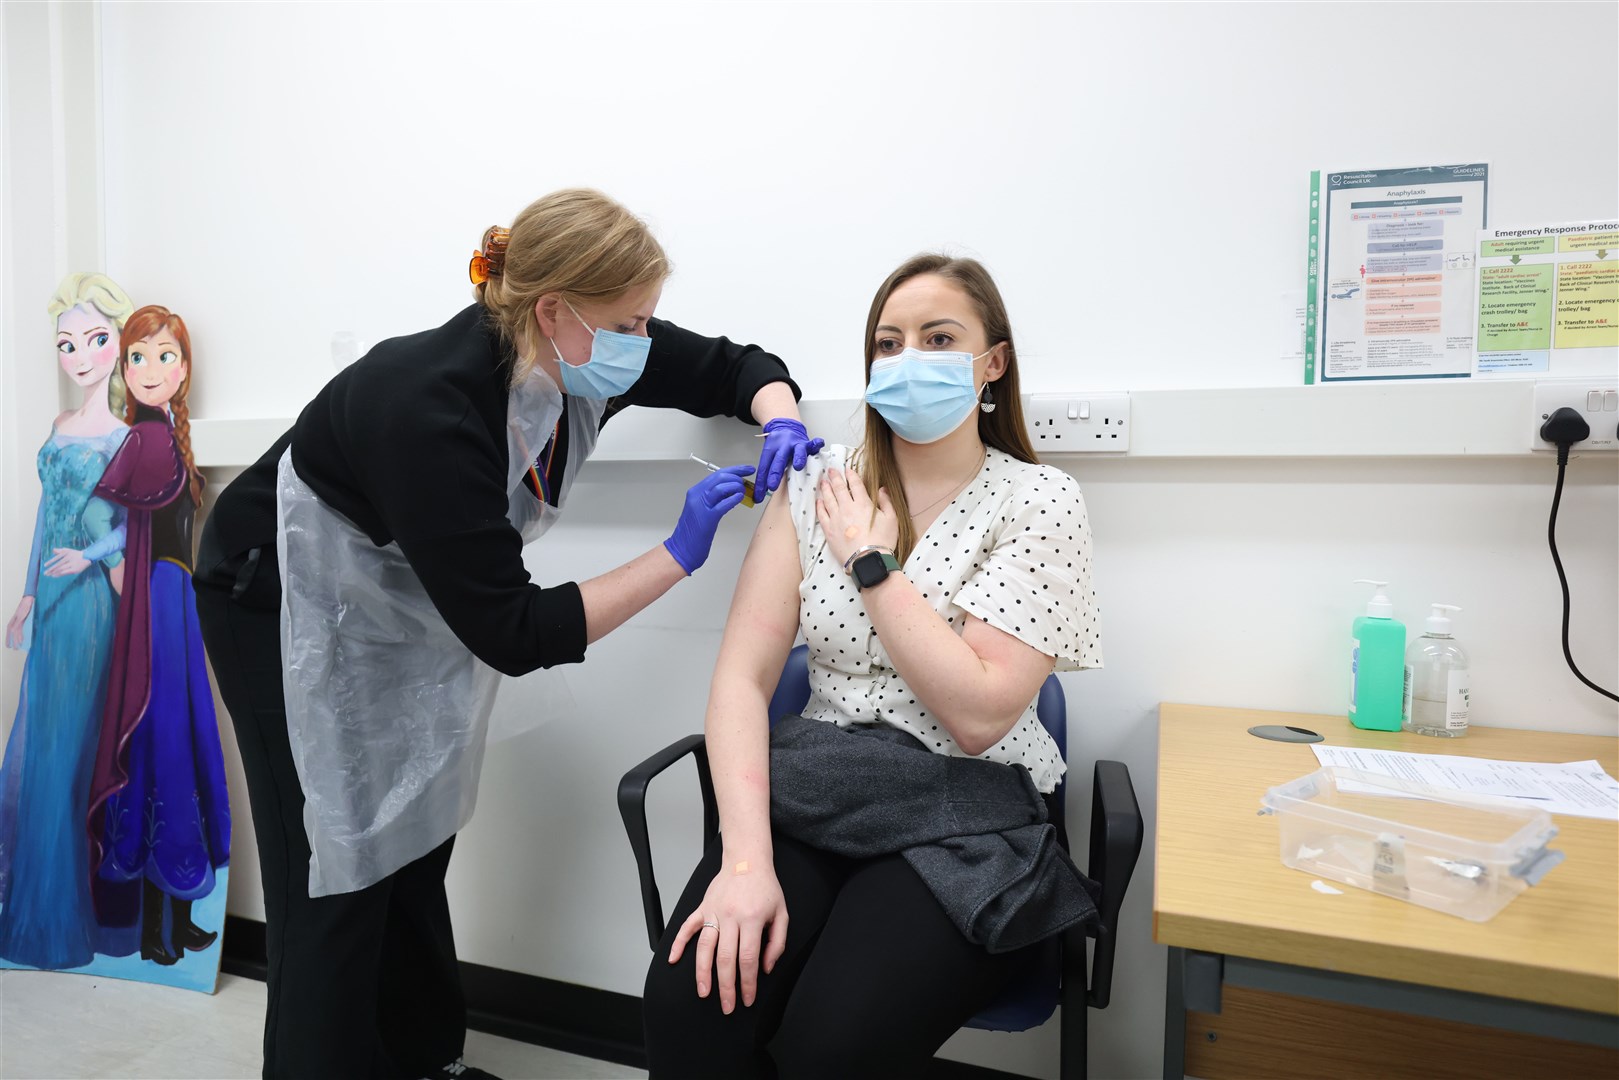 A new Moderna coronavirus booster jab has been approved for use on people aged over 18 in the UK (James Manning/PA).